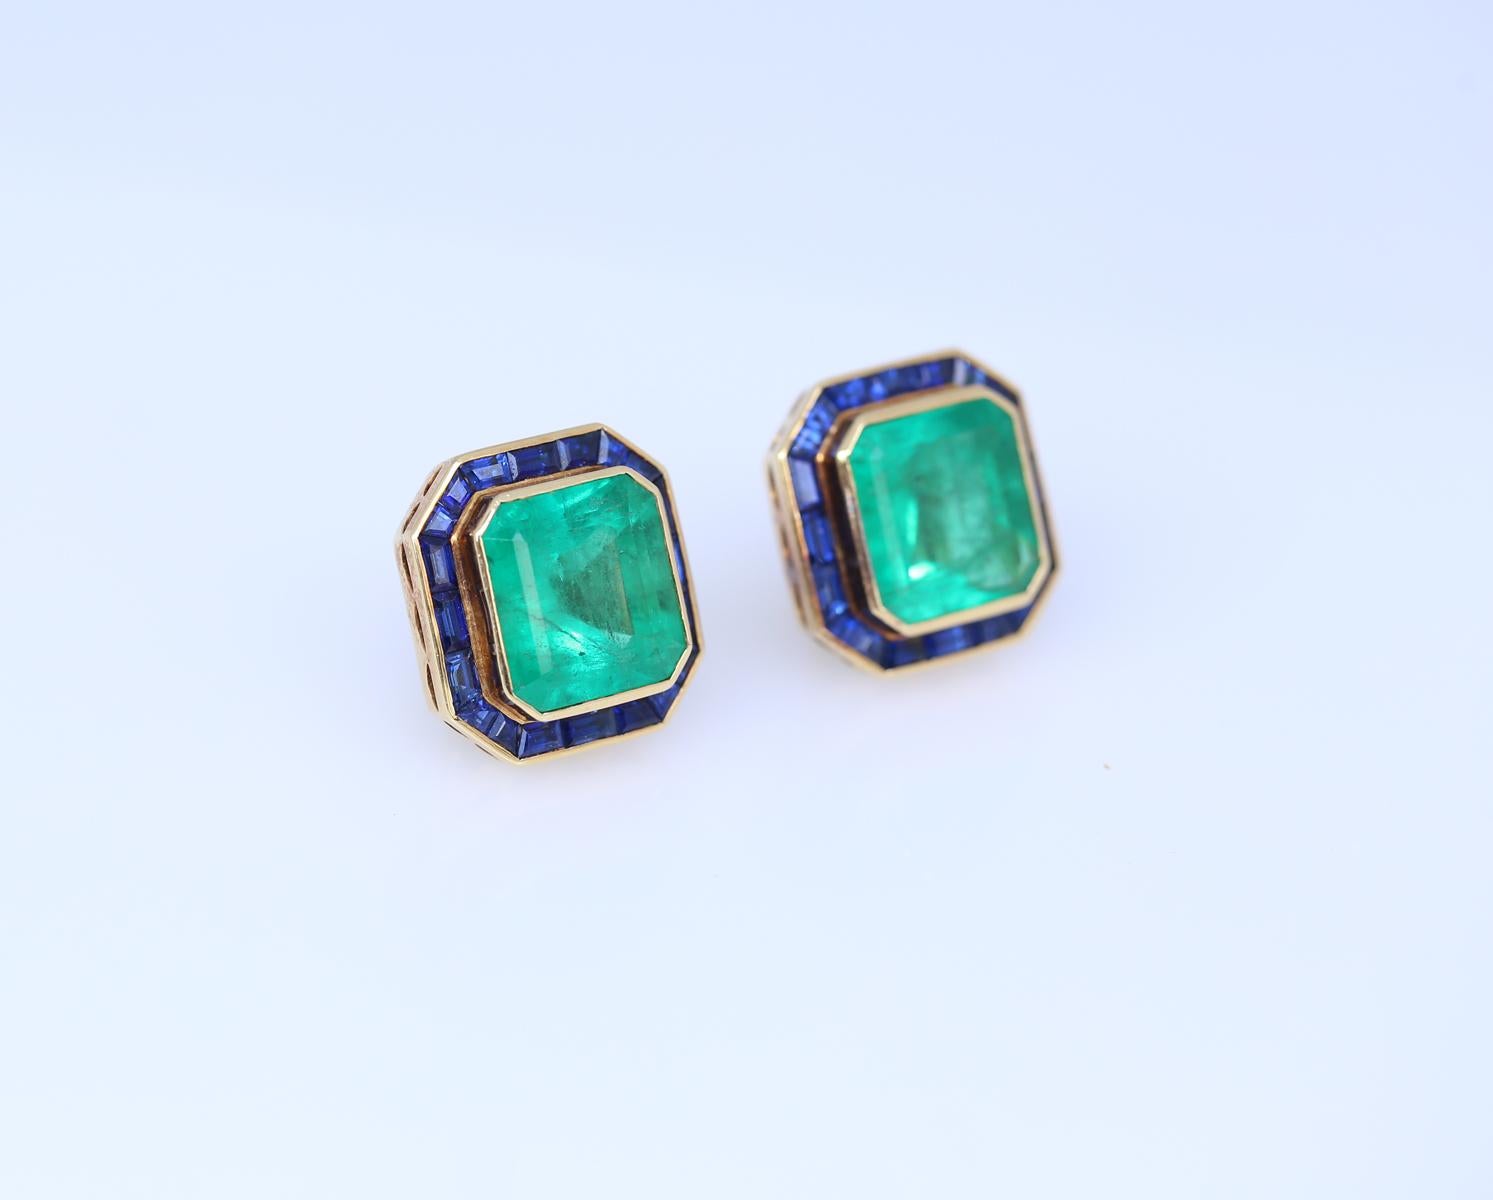 31 Carats Emerald Sapphire Earrings Yellow Gold Certified, 1975 For Sale 1